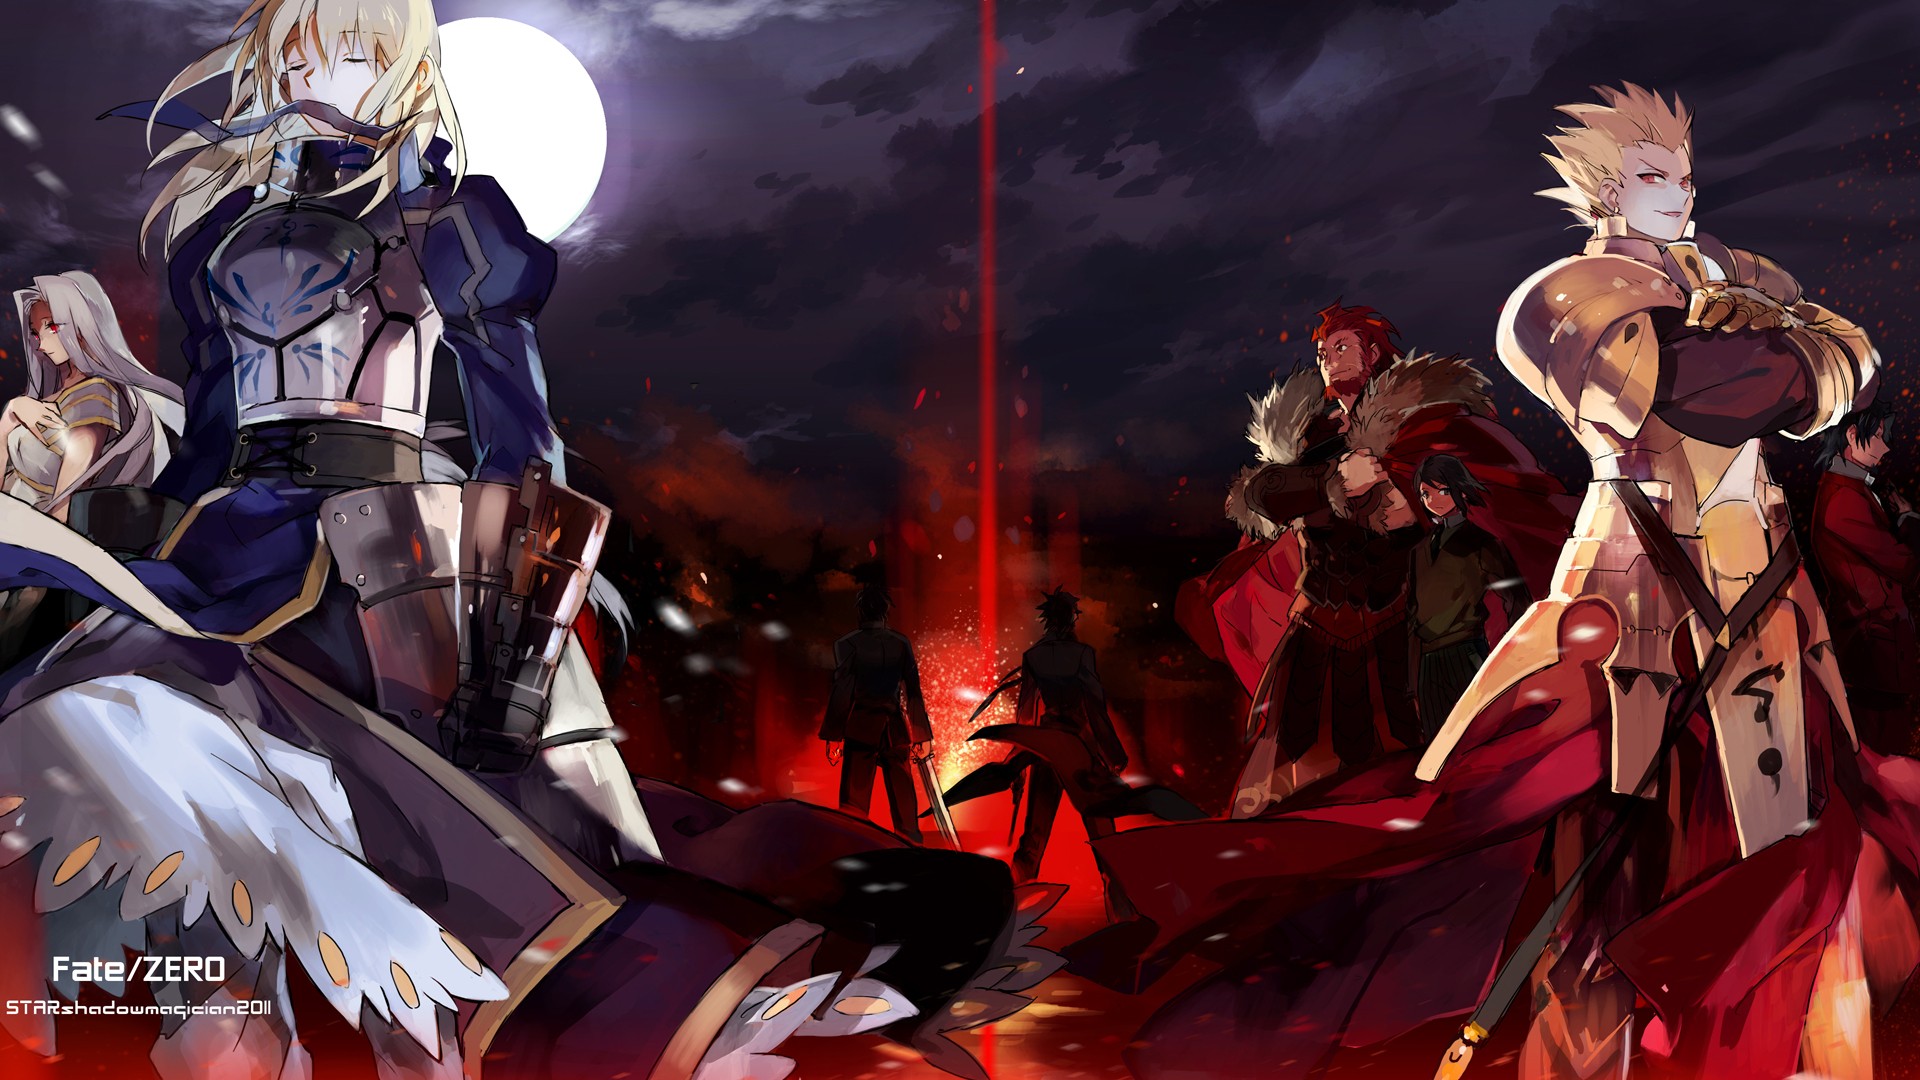  images Fate Stay Night HD wallpaper and background photos 32290756